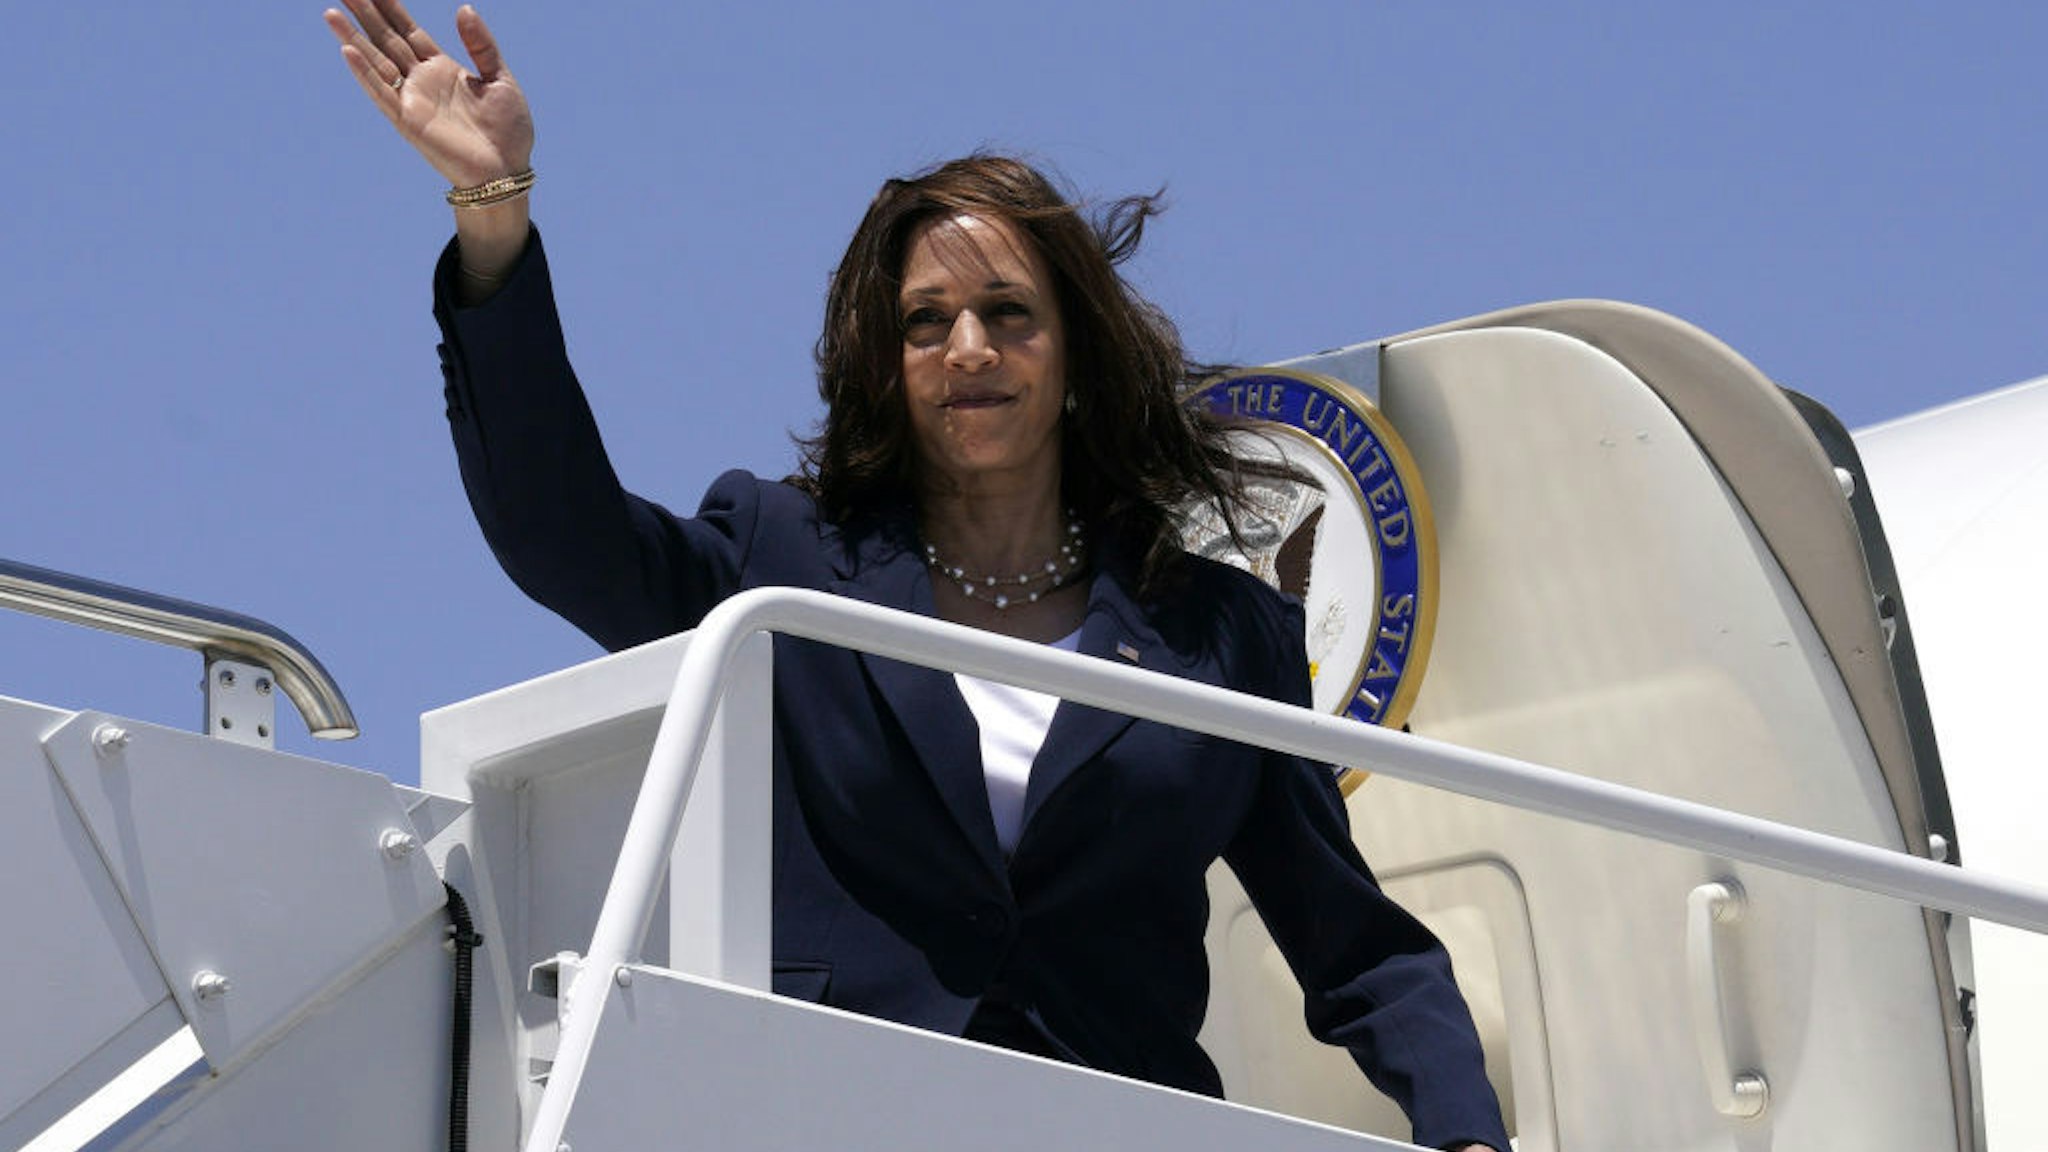 U.S. Vice President Kamala Harris boards Air Force Two at the El Paso International Airport in El Paso, Texas, U.S., on Friday, June 25, 2021. The vice president's visit to the southern border comes after months of denunciations from Republicans, as well as frustration from some Democrats, for not having gone to the border after being chosen to address the root causes of migration from Central America to the U.S. Photographer: Yuri Gripas/Abaca/Bloomberg